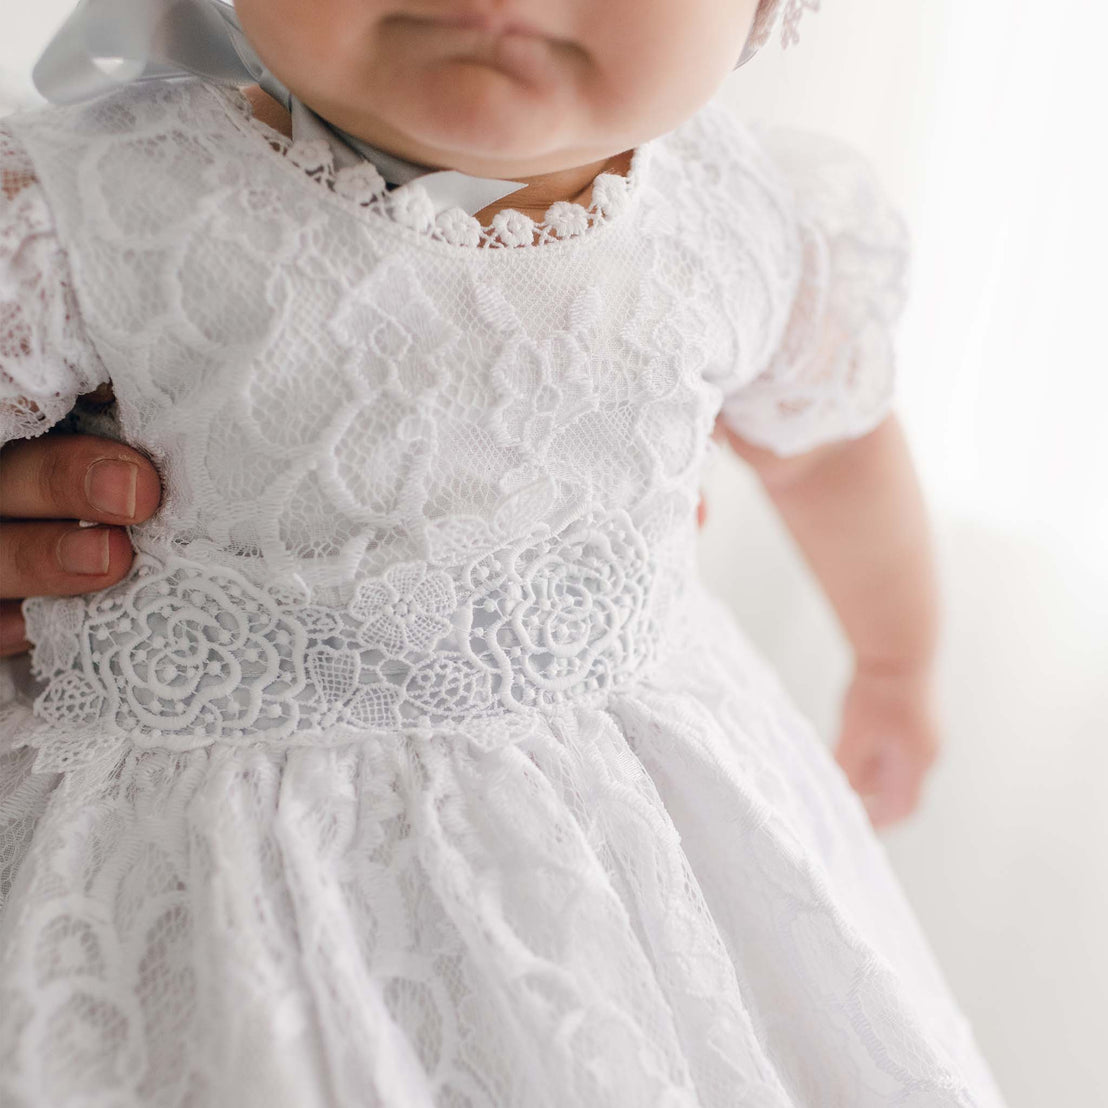 A close-up of an infant in an Olivia Christening Gown & Bonnet being held by an adult, with a focus on the detailed texture of the fabric and the baby's chubby arm.